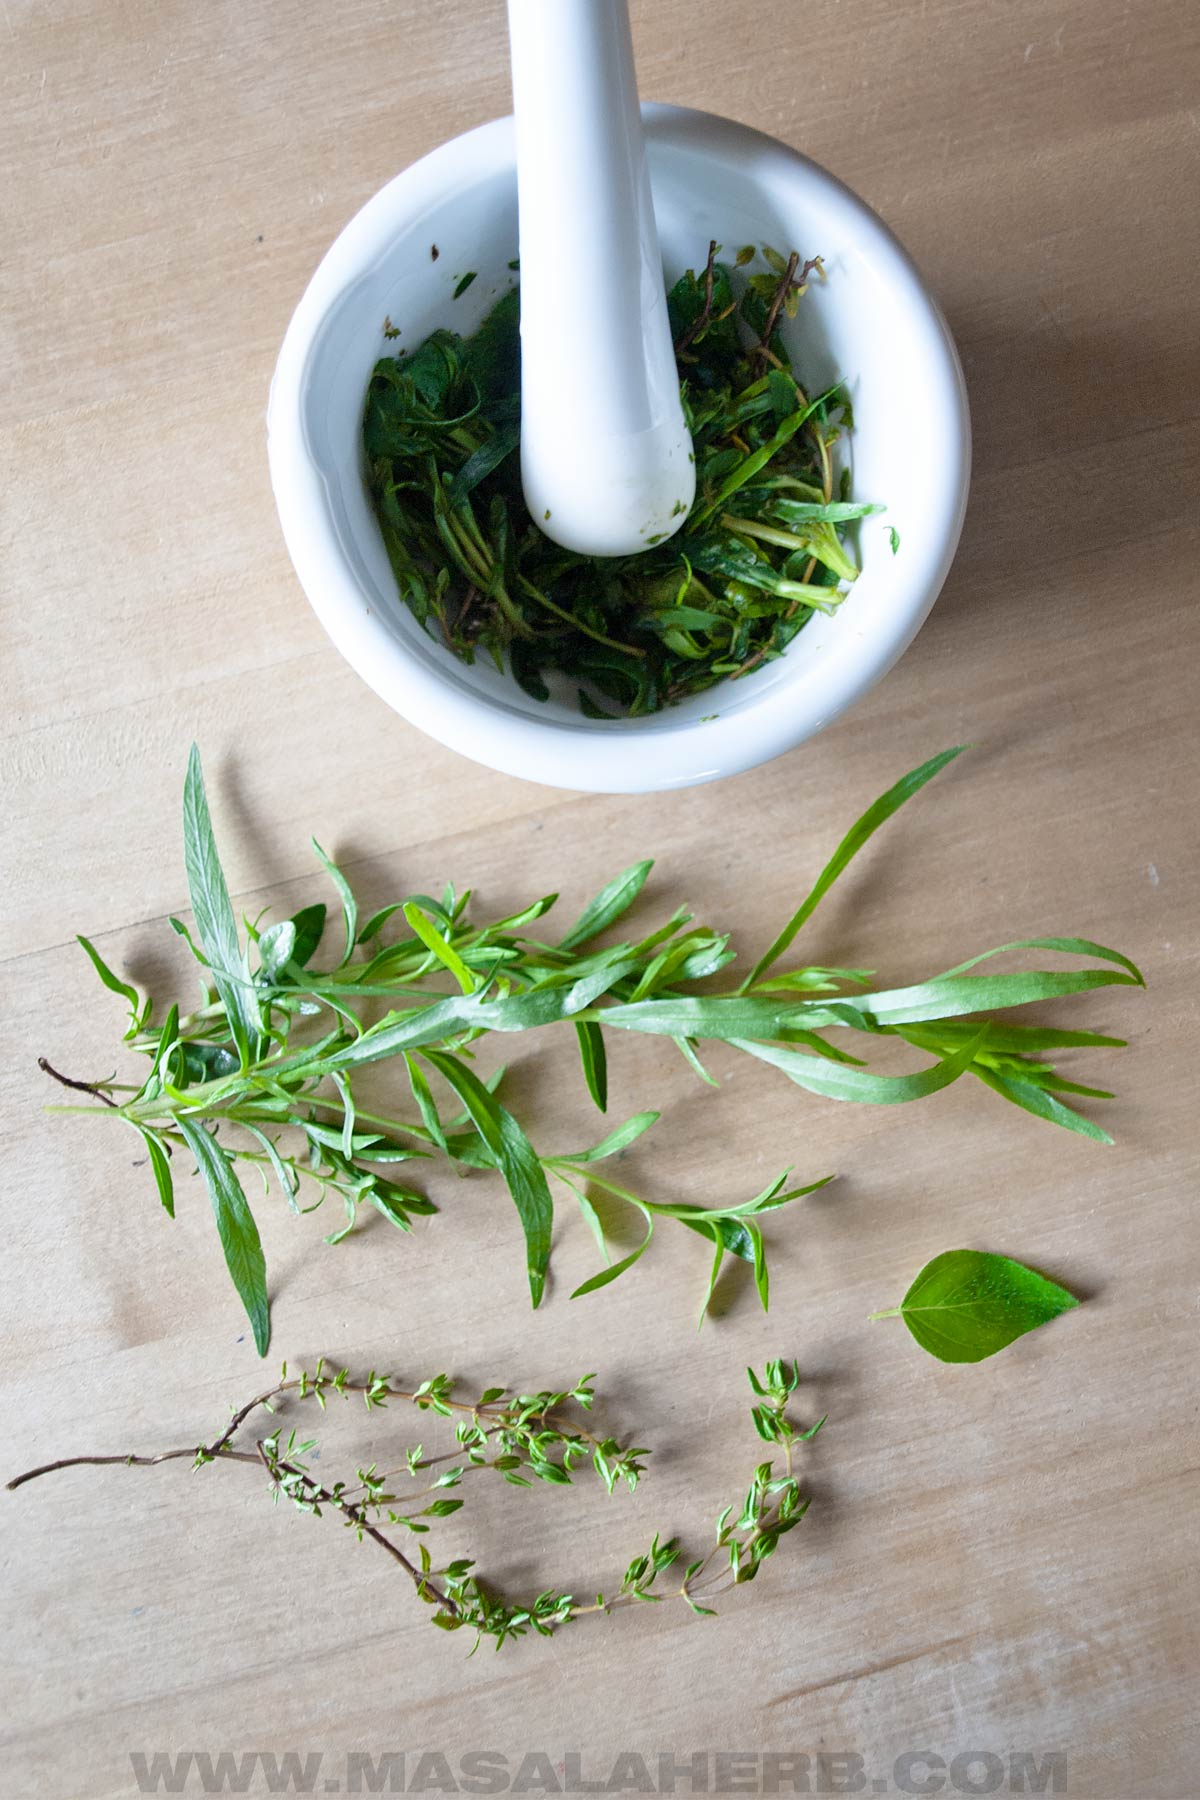 preparing herbs for infusing